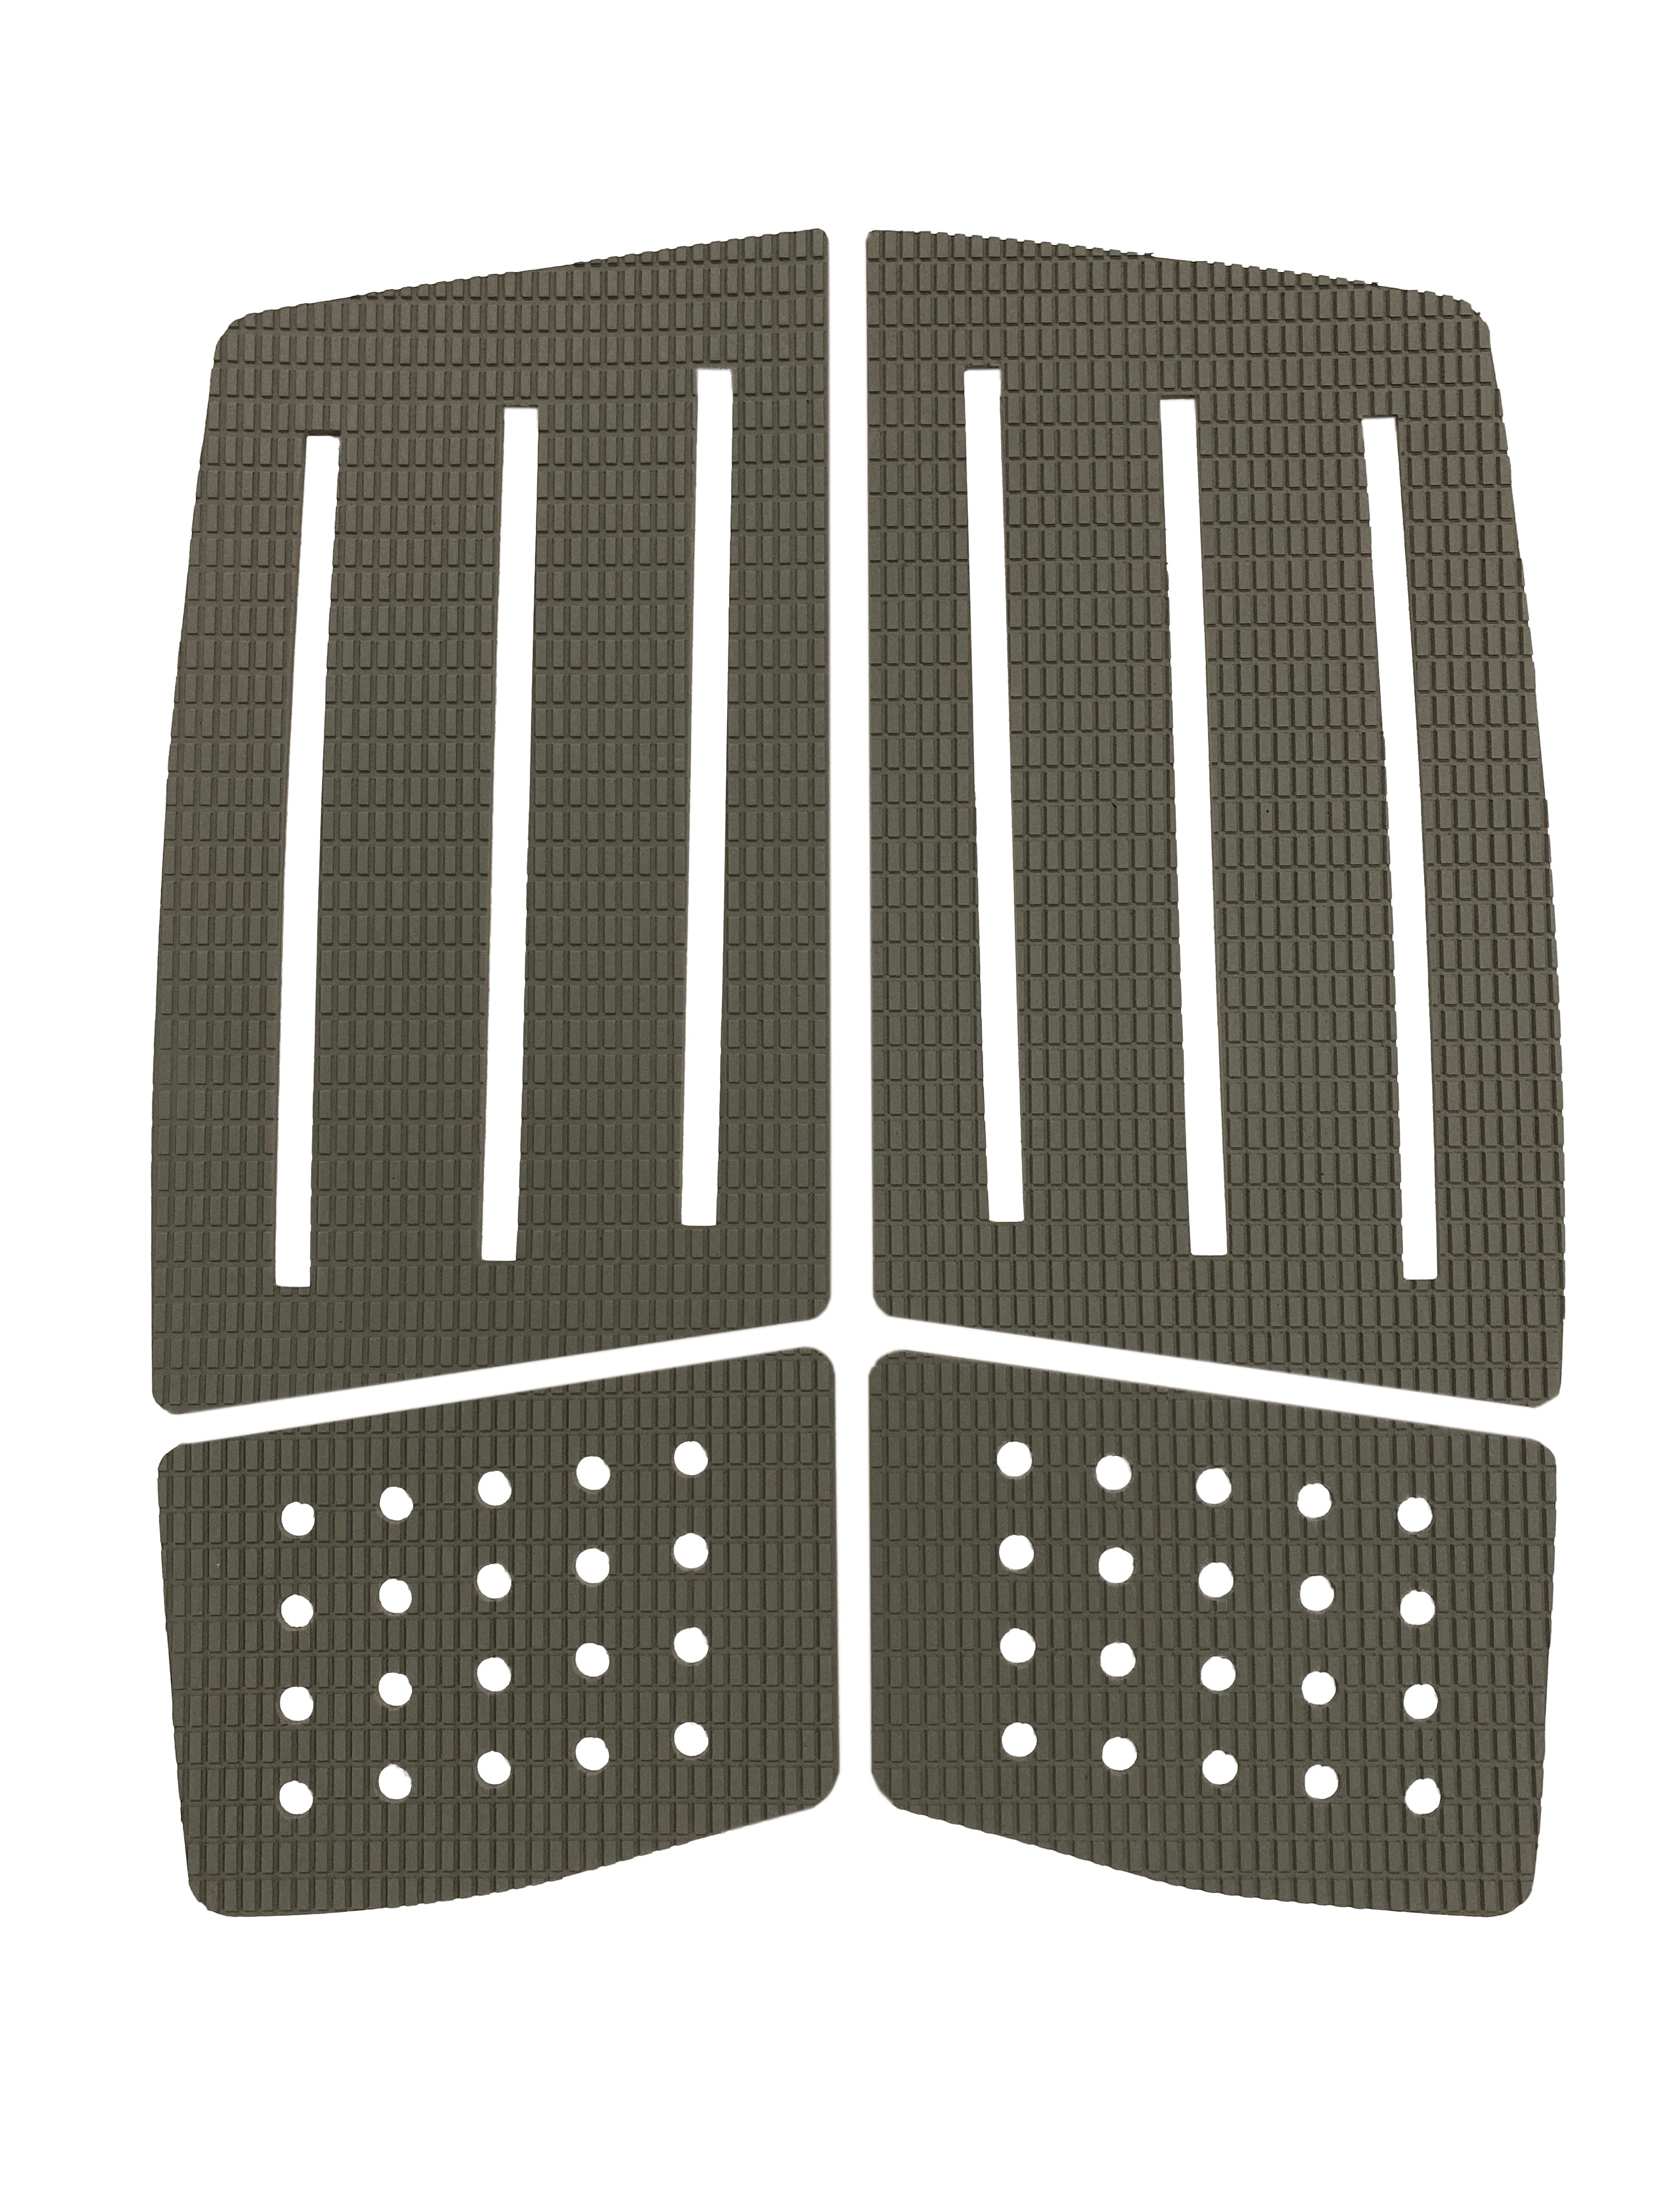 Firewire Front Foot Traction Pad